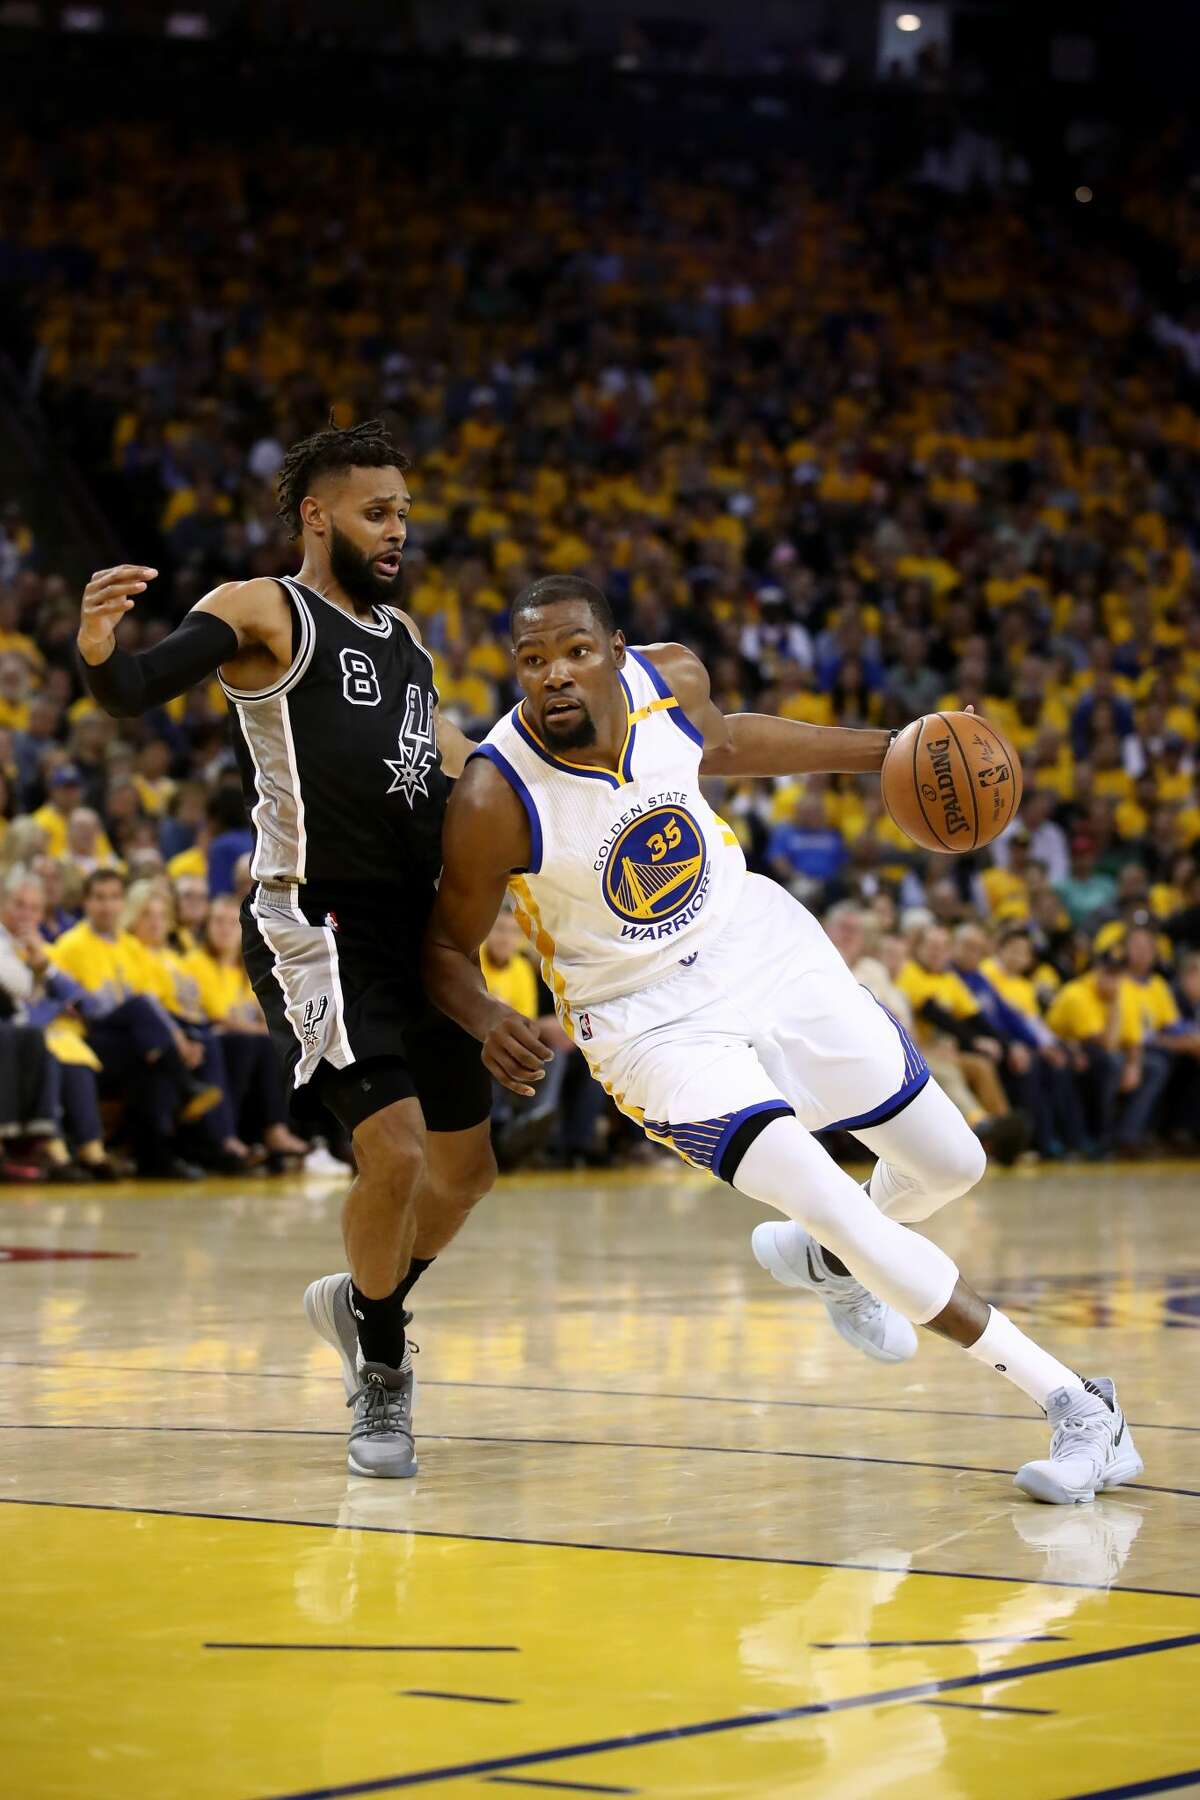 OAKLAND, CA - MAY 16: Kevin Durant #35 of the Golden State Warriors drives with the ball against Patty Mills #8 of the San Antonio Spurs during Game Two of the NBA Western Conference Finals at ORACLE Arena on May 16, 2017 in Oakland, California. NOTE TO USER: User expressly acknowledges and agrees that, by downloading and or using this photograph, User is consenting to the terms and conditions of the Getty Images License Agreement. (Photo by Ezra Shaw/Getty Images)